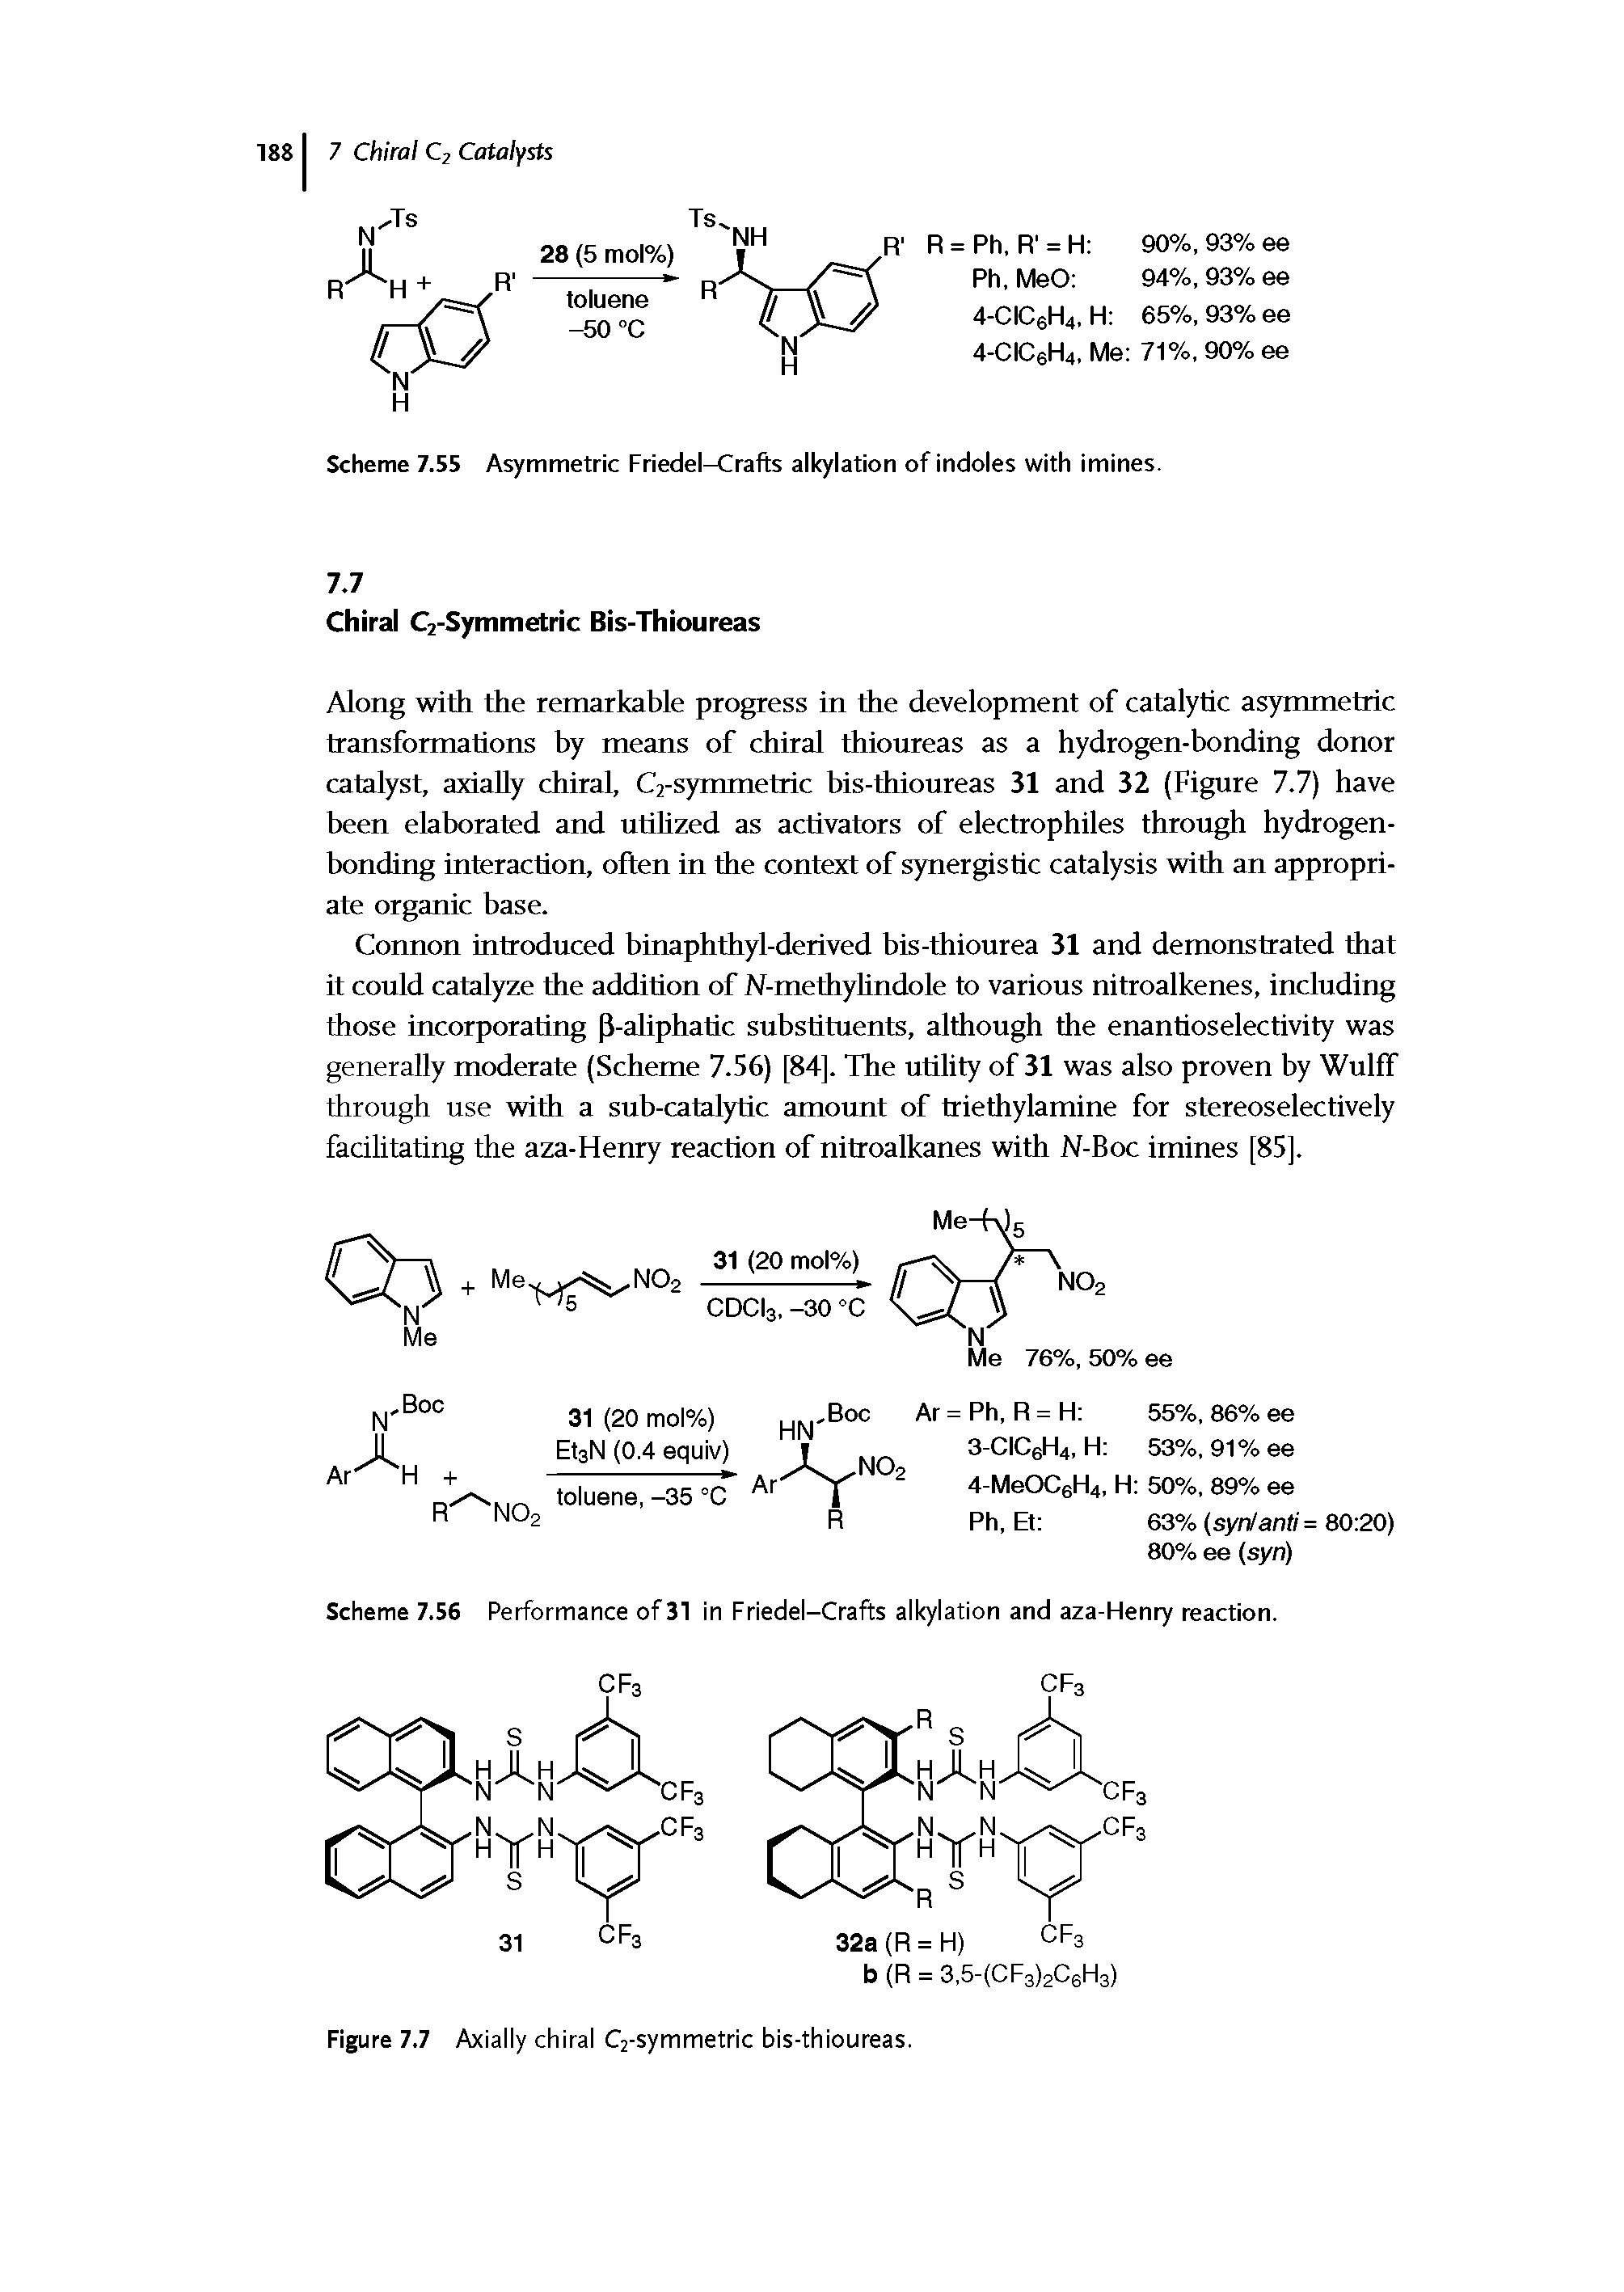 Scheme 7.56 Performance of 31 in Friedel-Crafts alkylation and aza-ttenry reaction...